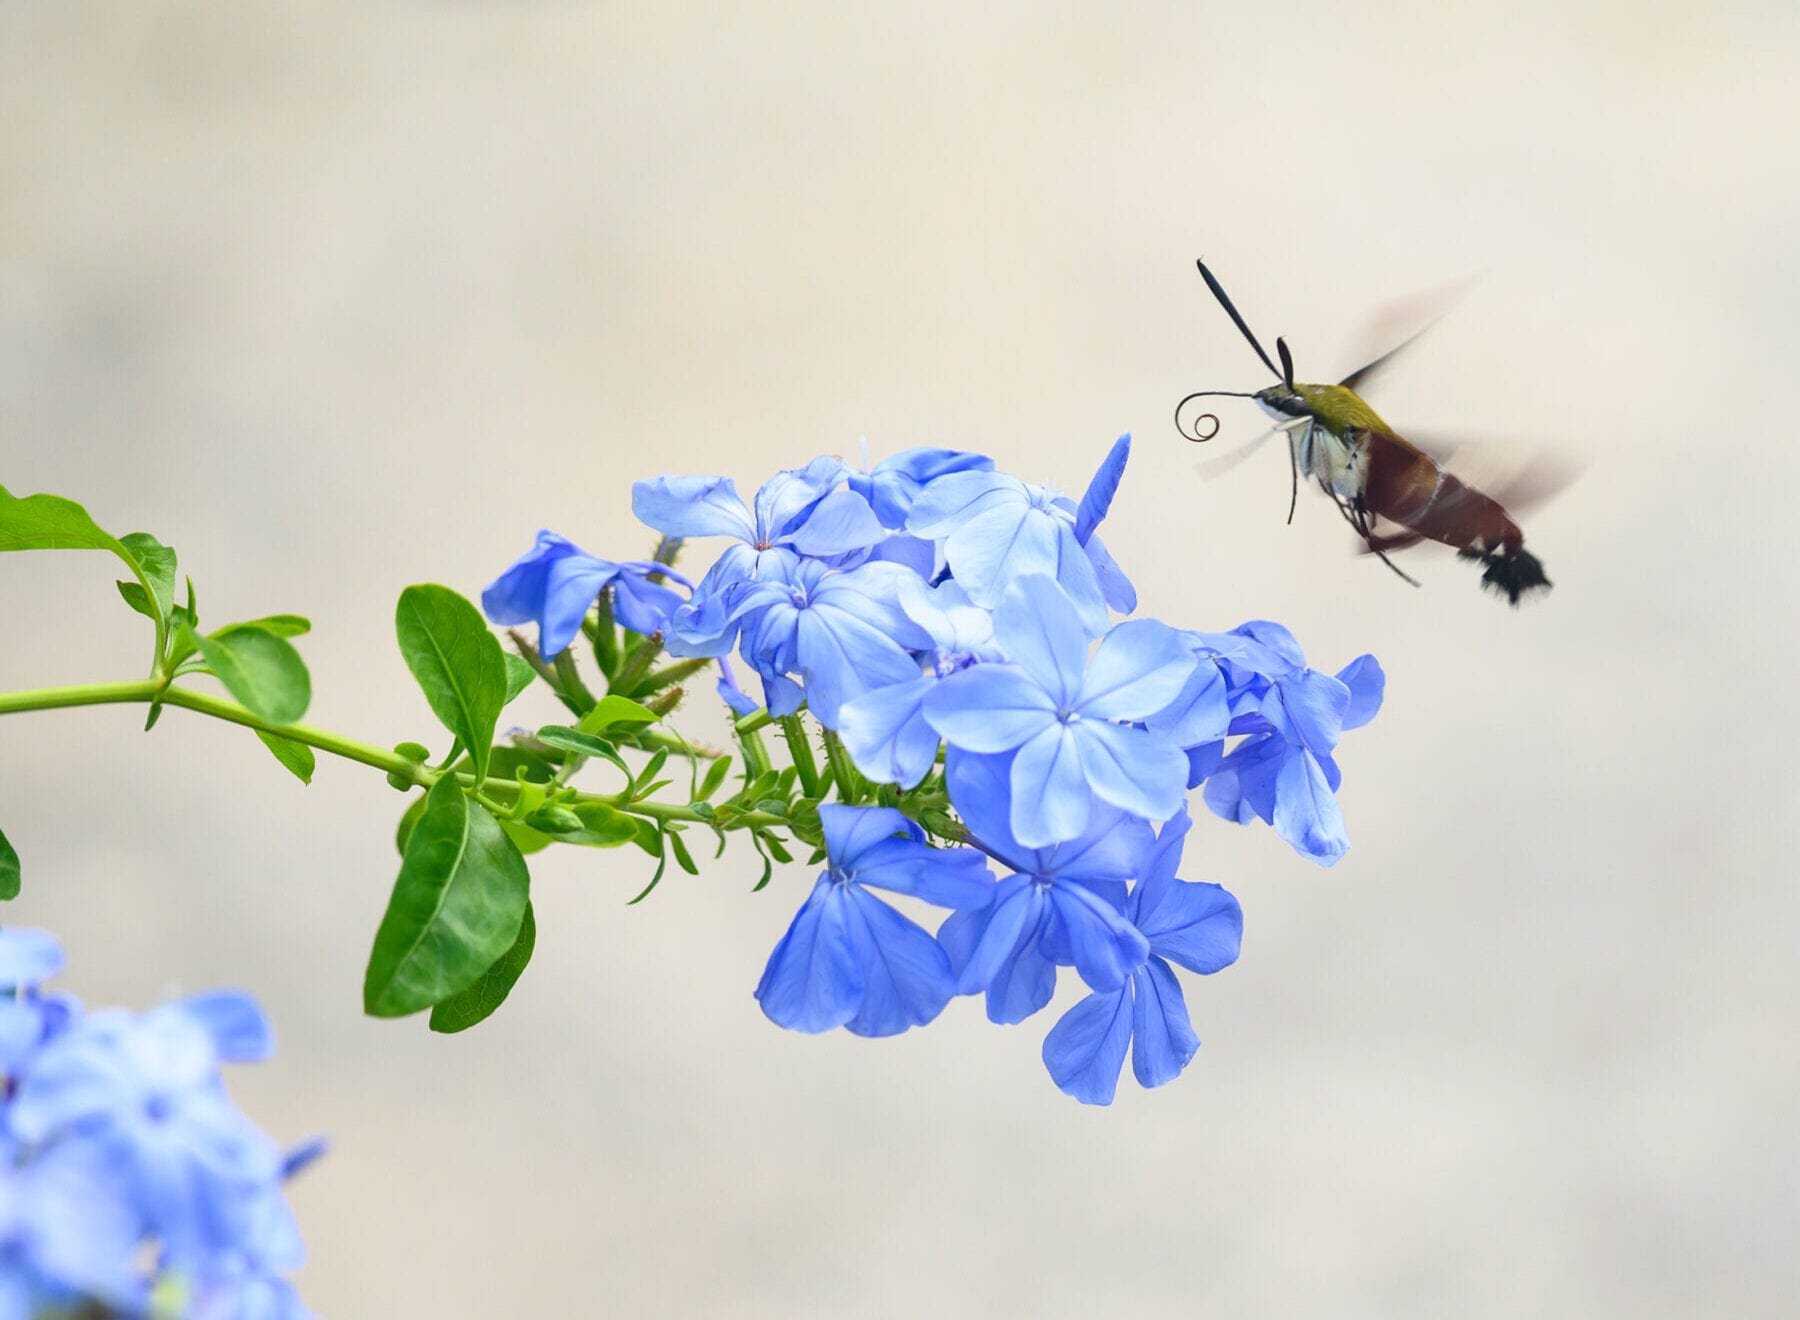 Bees and butterflies aren't the only pollinators. Flies, beetles, moths and other insects also play a key role in helping flowering plants reproduce. Here, a hummingbird hawk moth unfurls its long proboscis to feed.
FLORIDA MUSEUM PHOTO BY JEFF GAGE